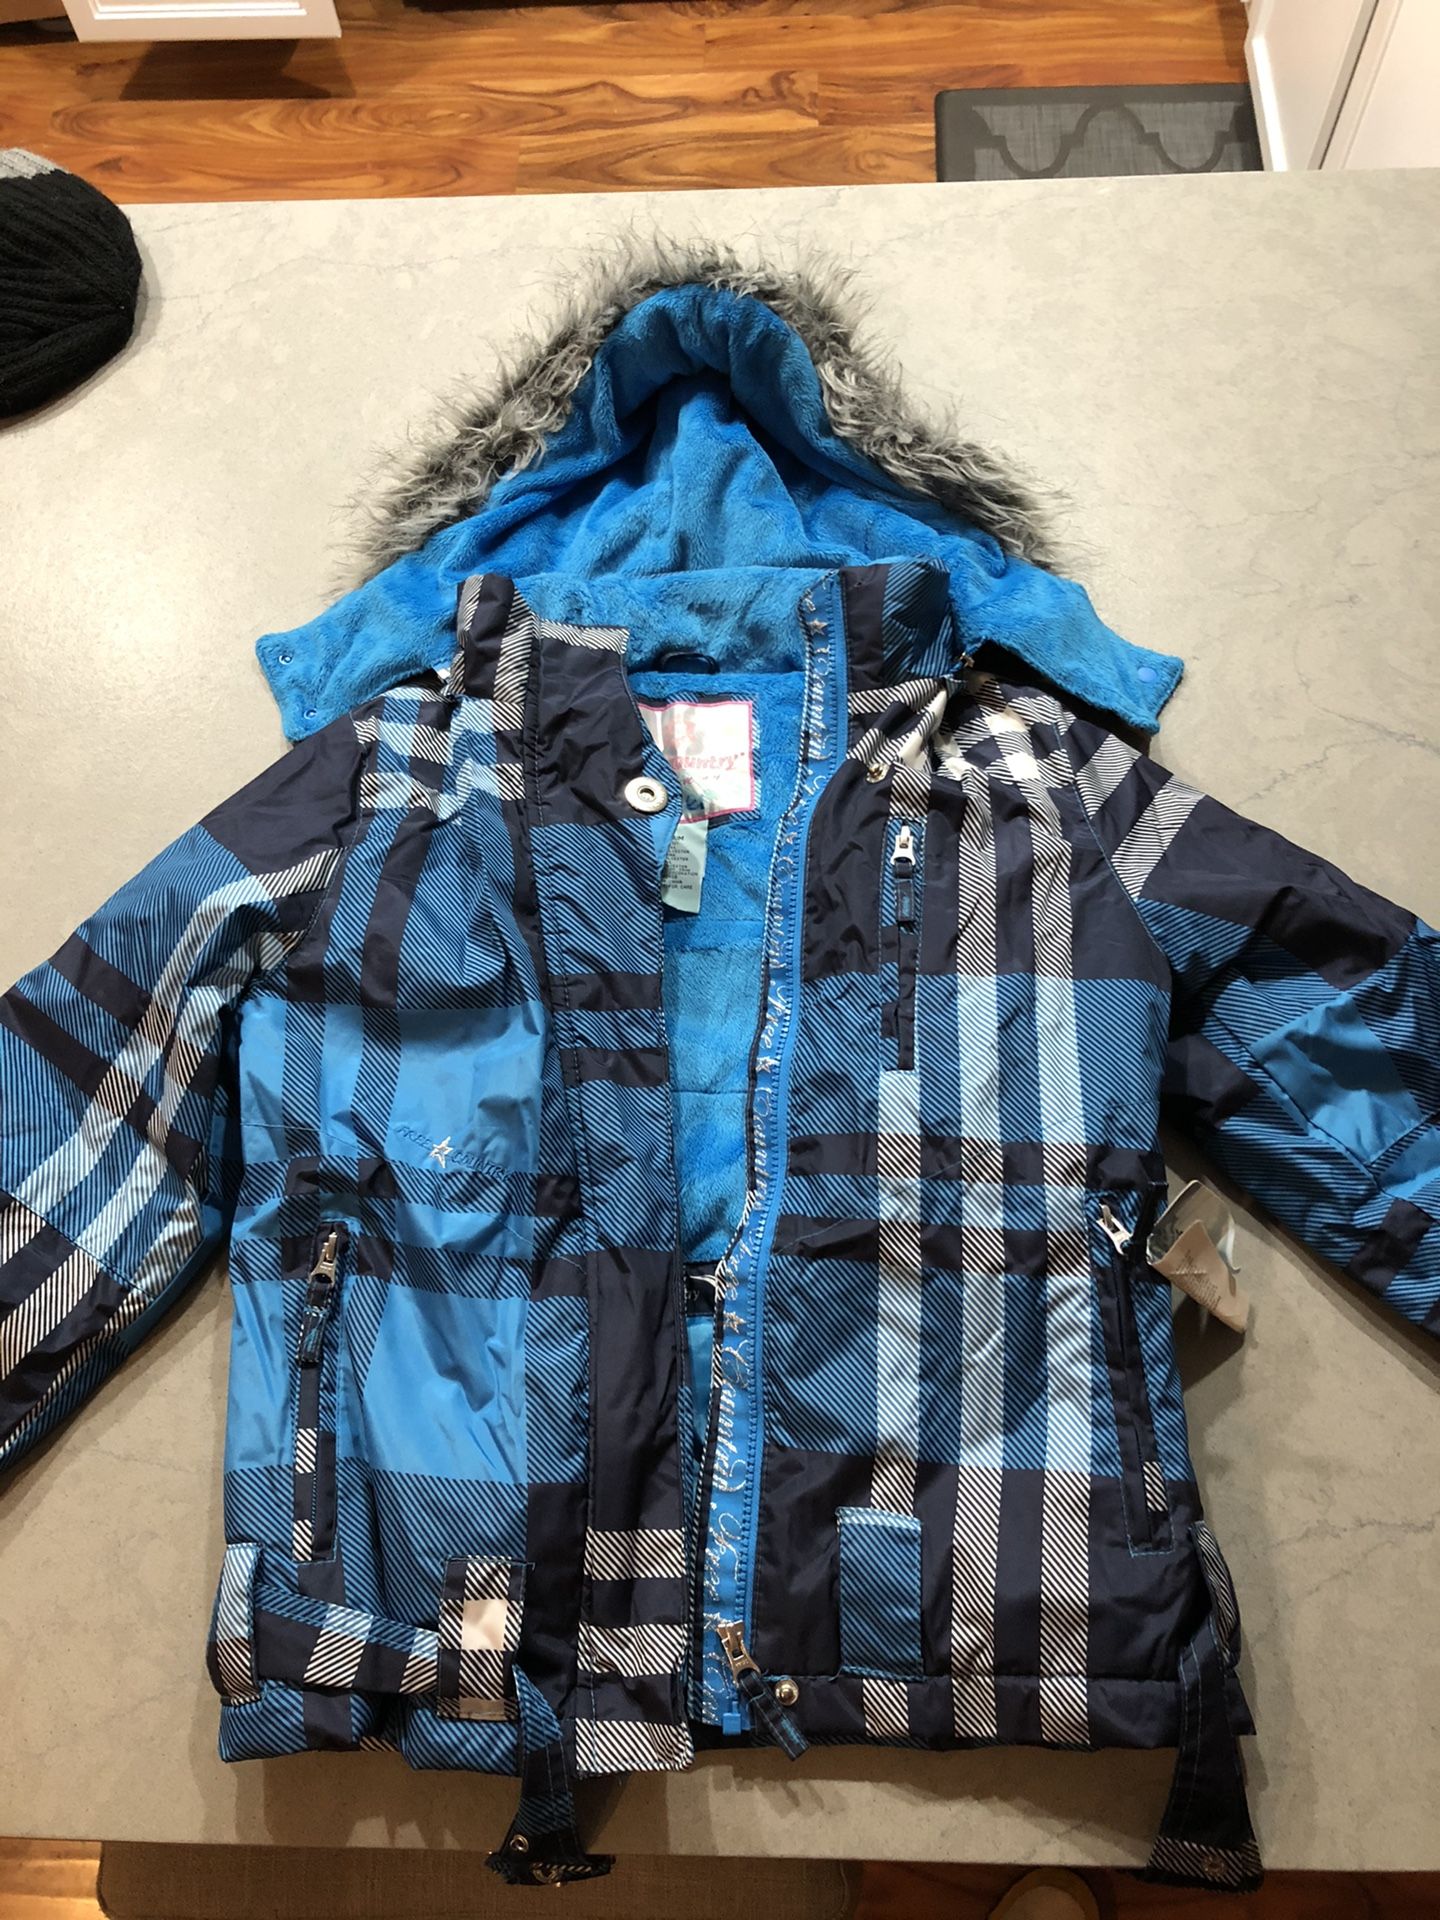 Kids/youth snow/ski jacket, mittens and vest